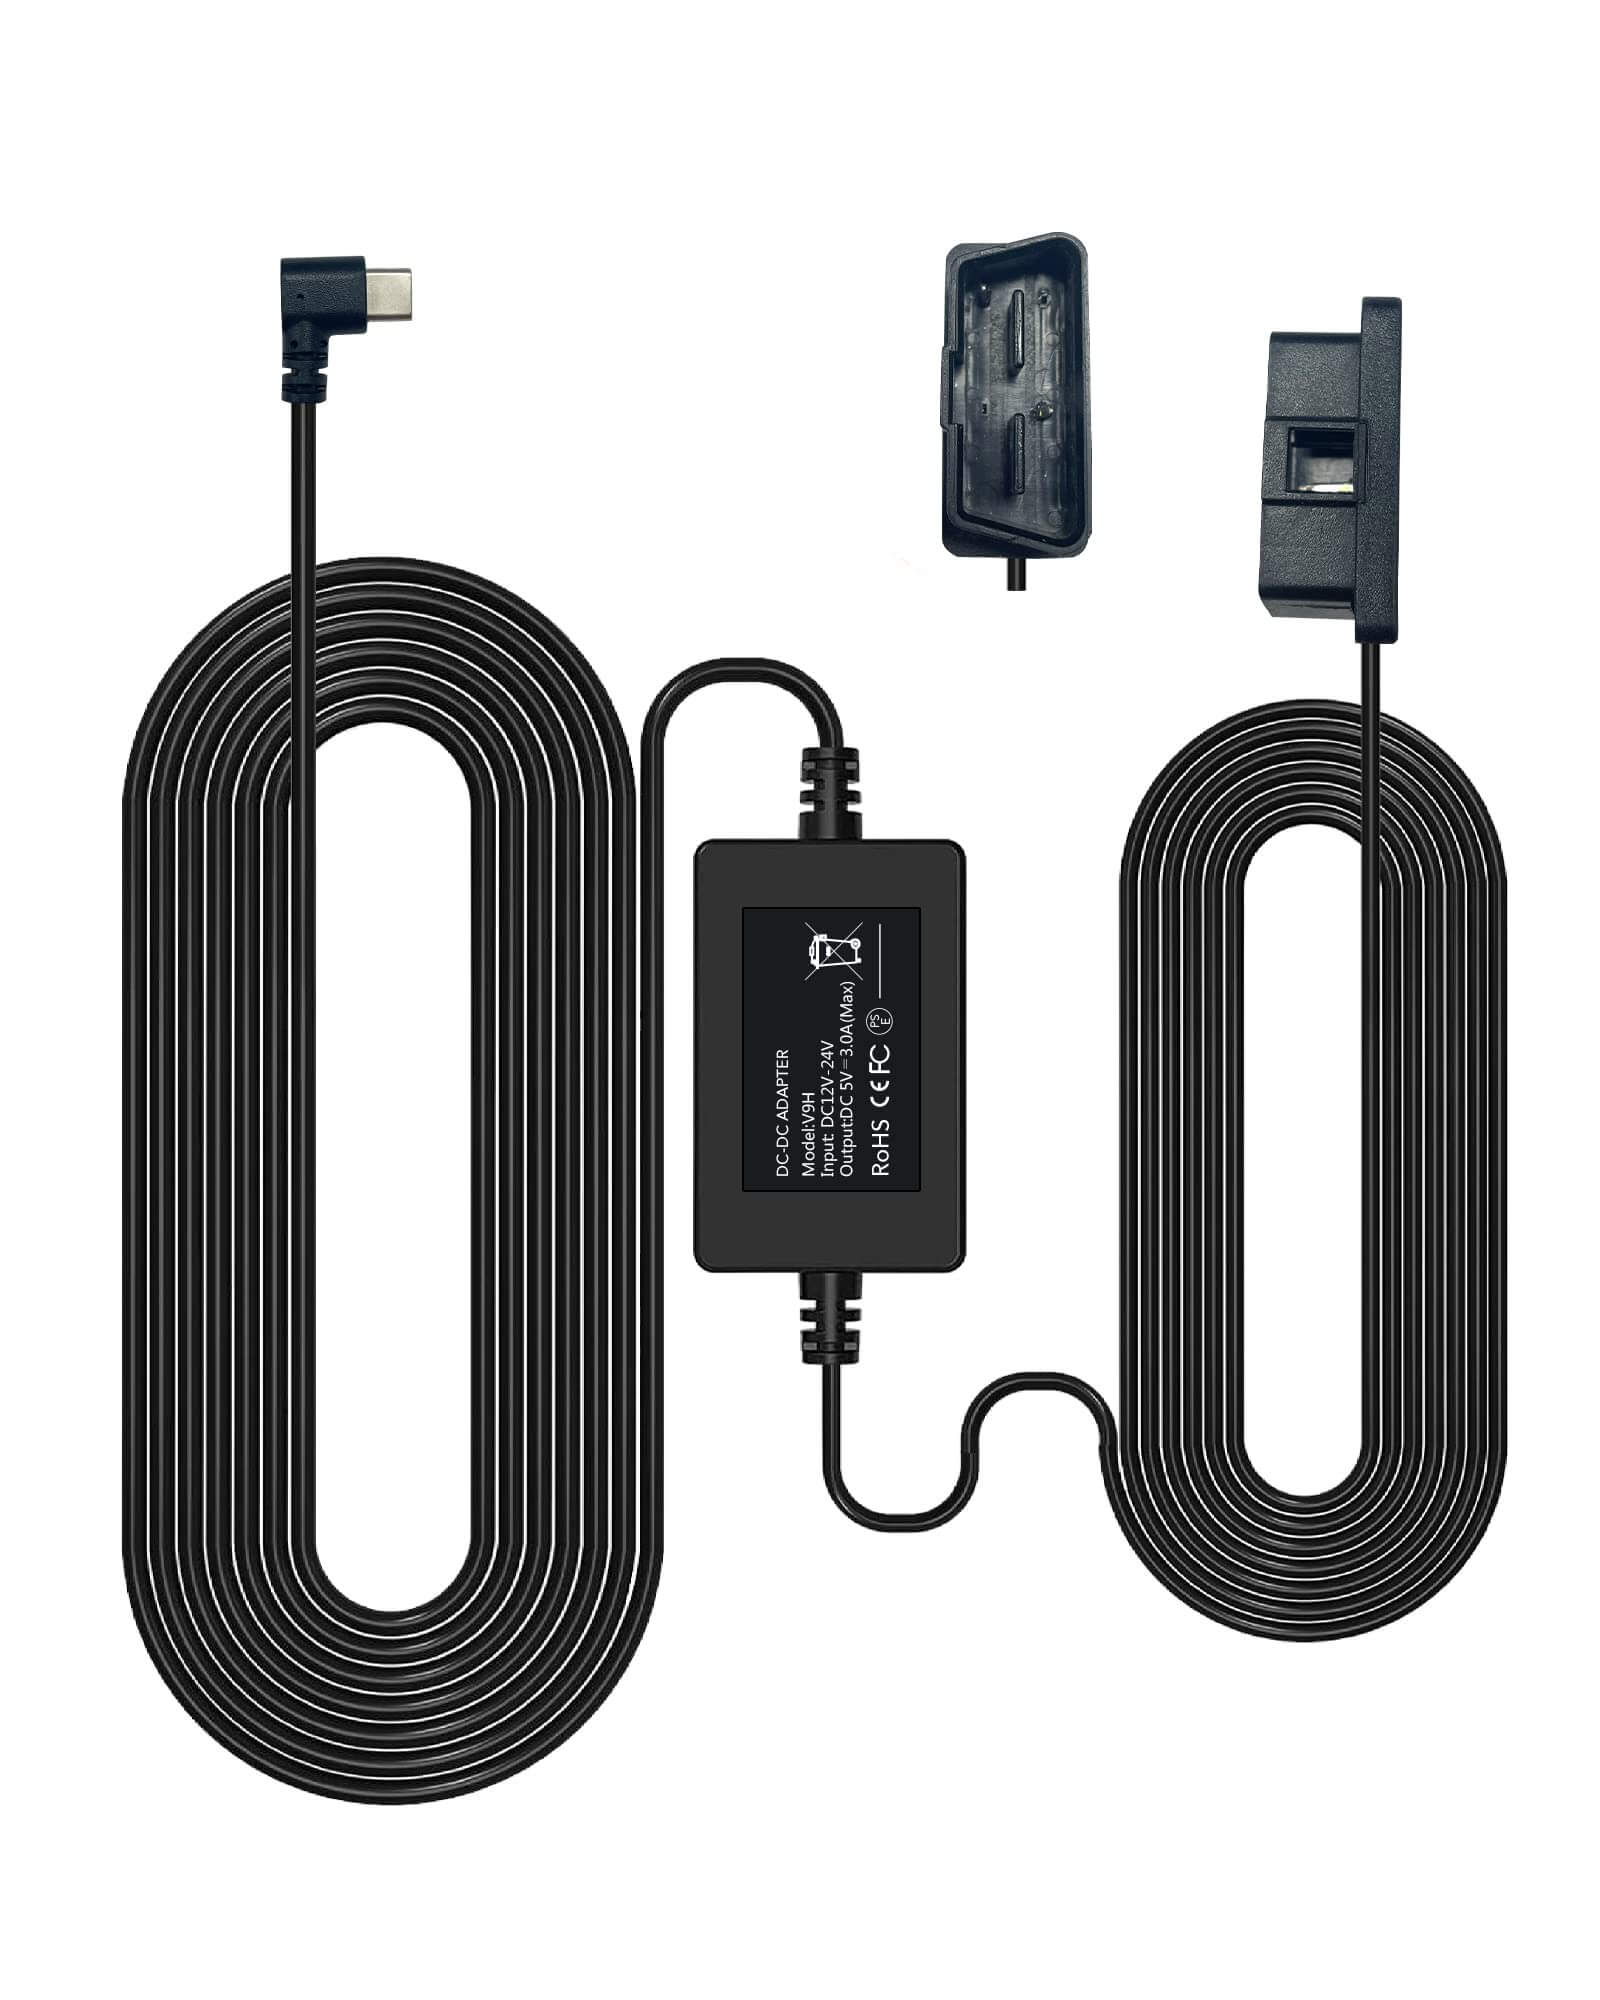 WOLFBOX Dashcam Hardwire Kit For G900 Parking Mode Accessory WOLFBOX OBD Hardwire kit-11.5ft  